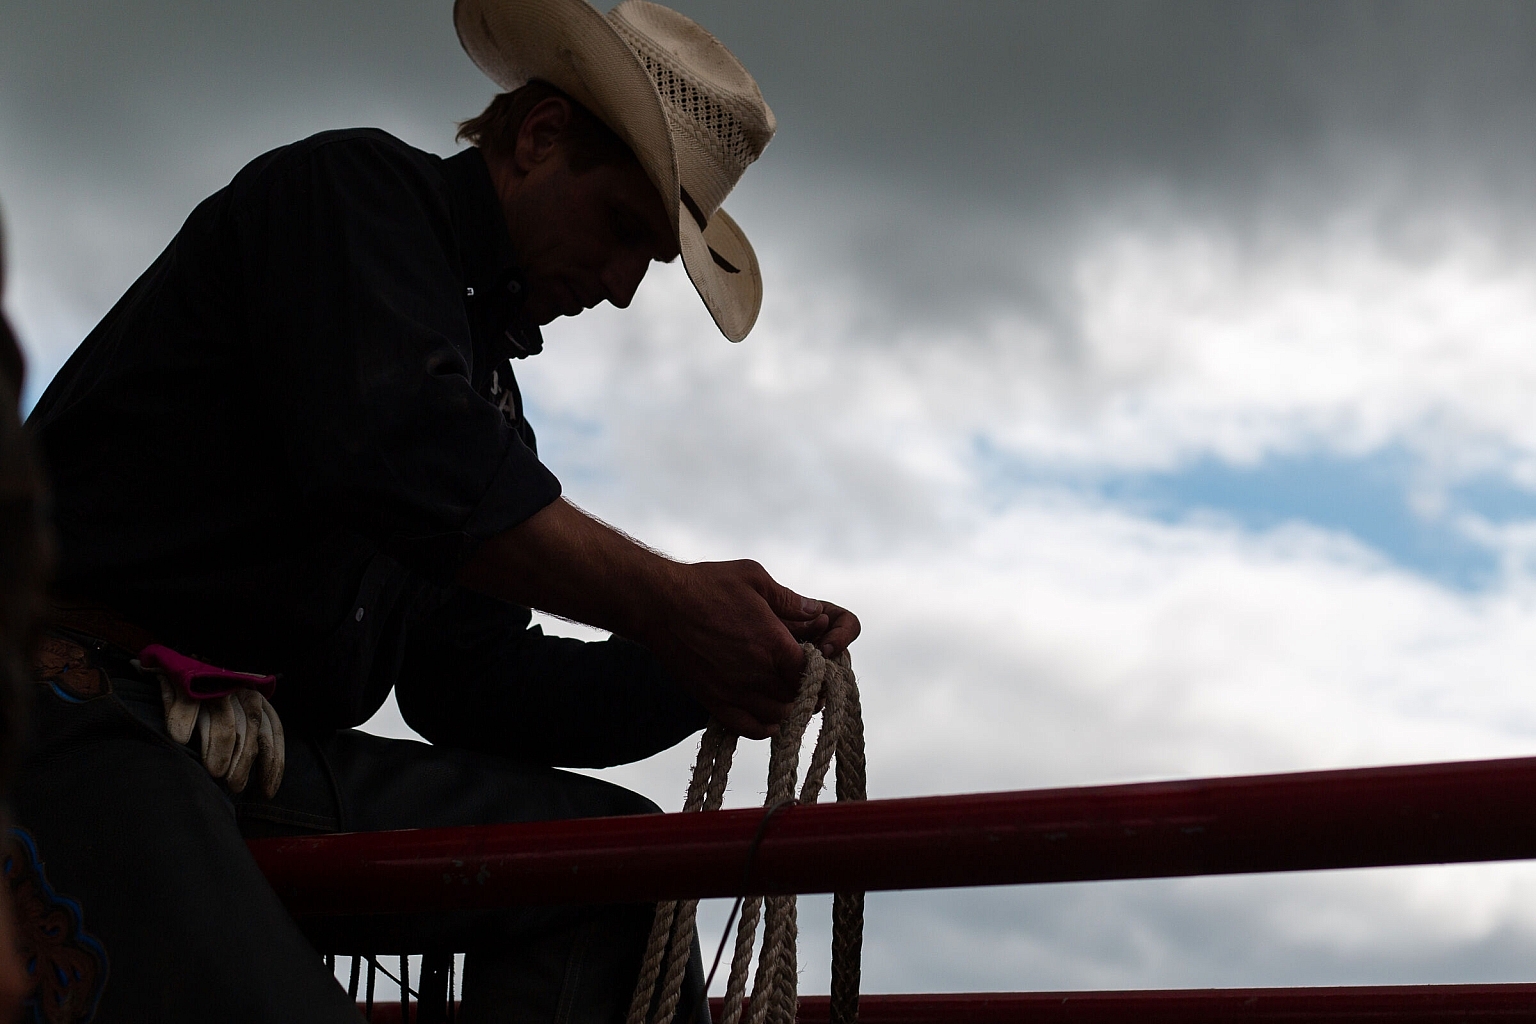 Silhouette of a cowboy in a hat sitting on a fence, holding a rope. Cloudy sky is in the background.